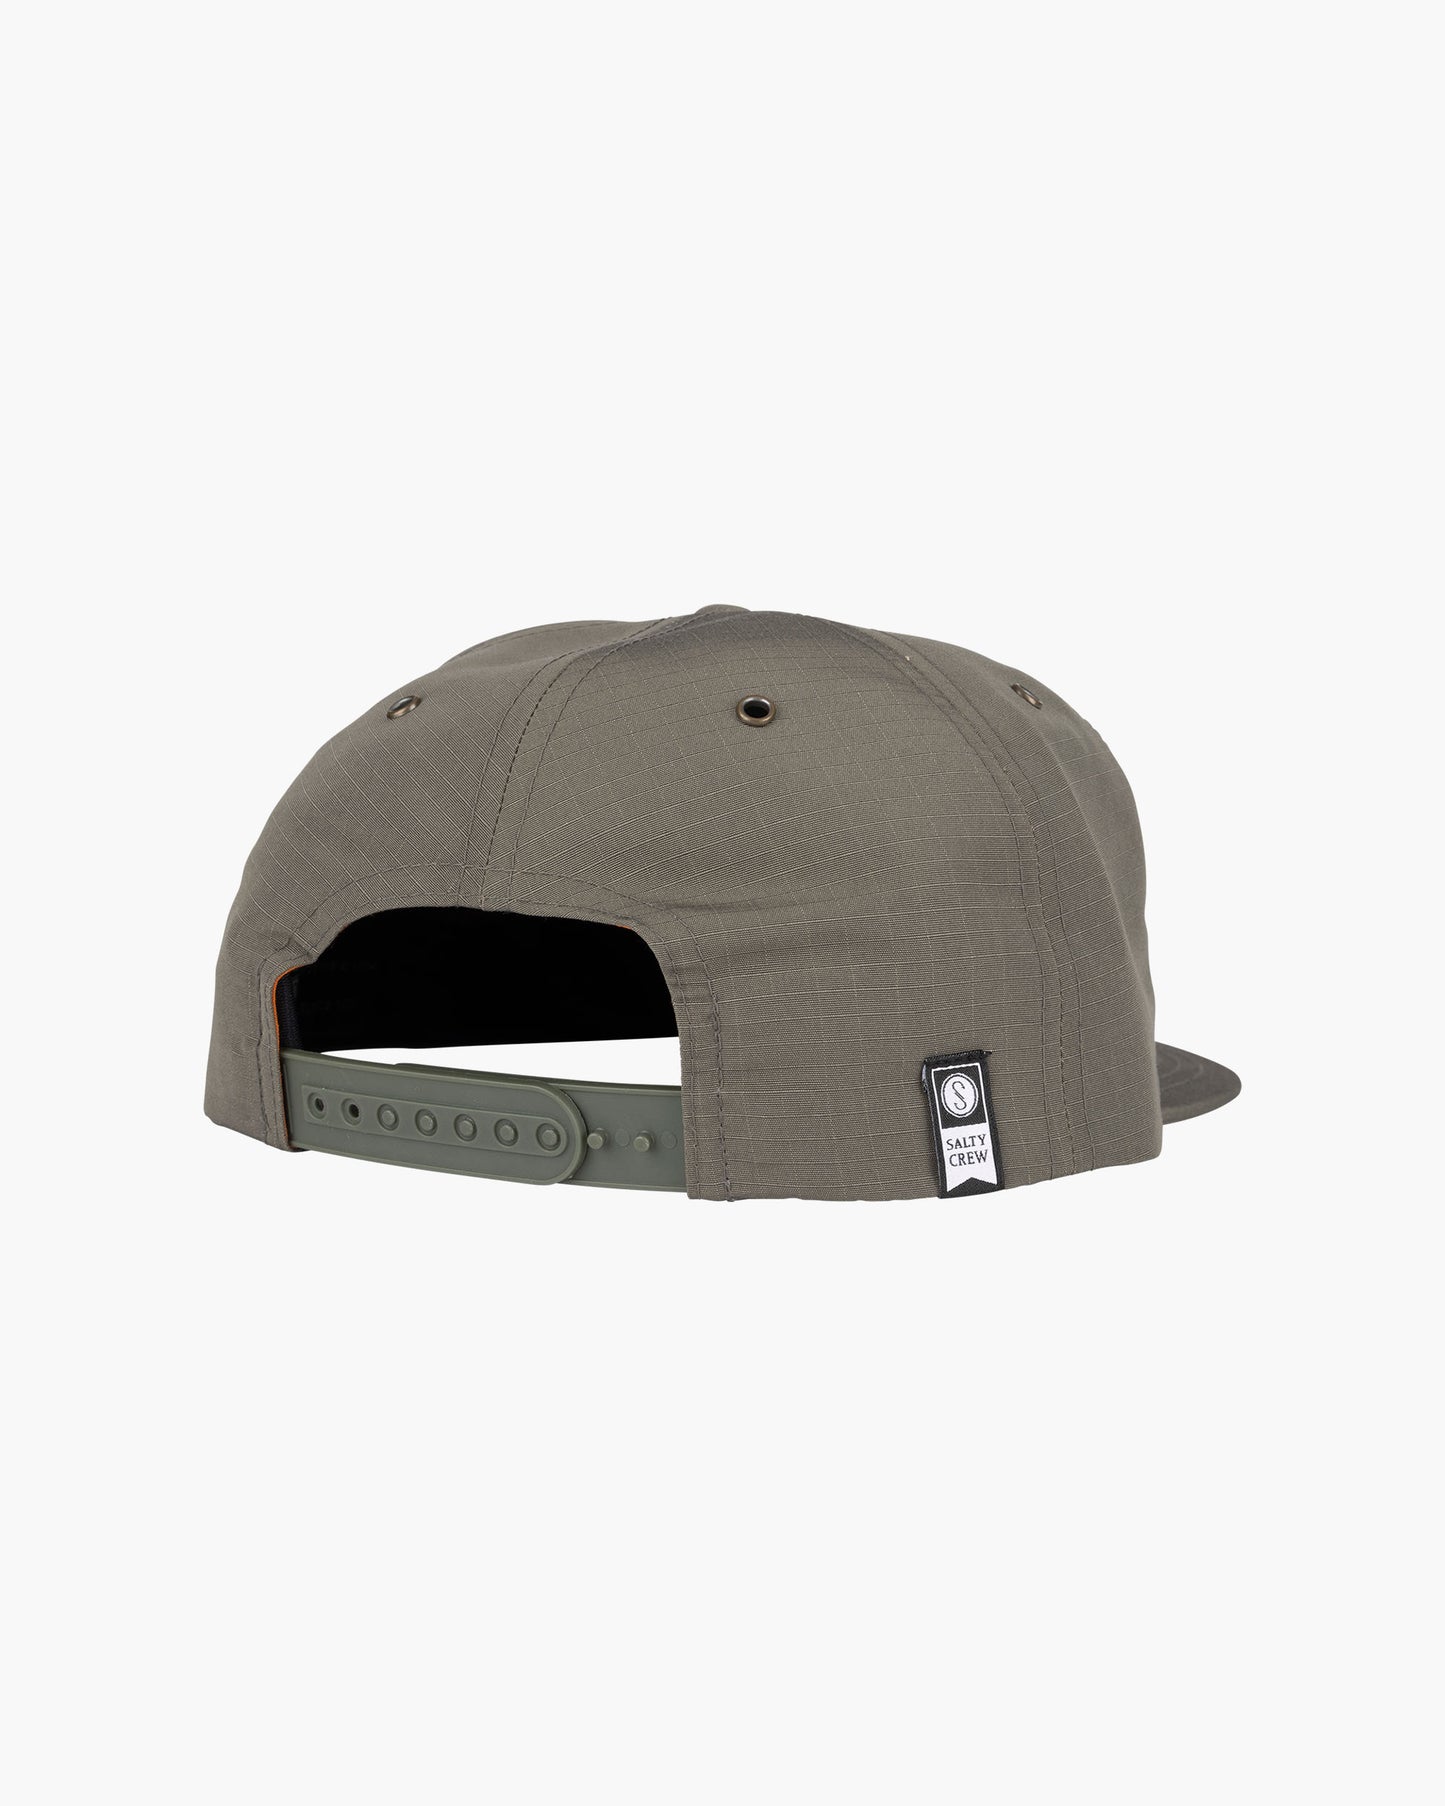 Tippet Rip 5 Panel - Olive